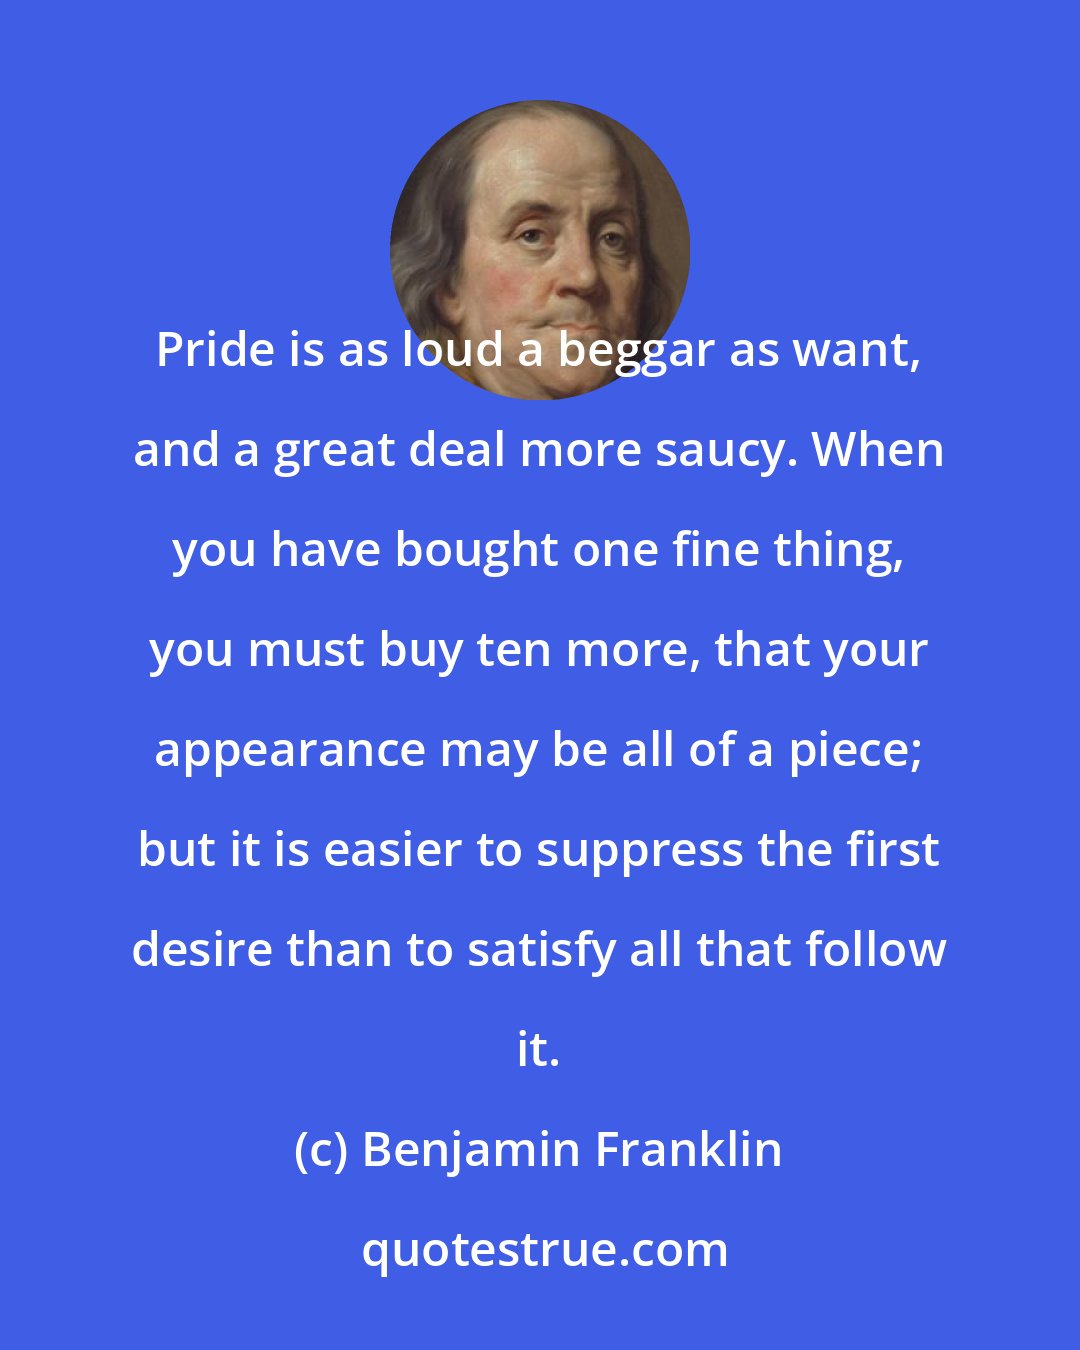 Benjamin Franklin: Pride is as loud a beggar as want, and a great deal more saucy. When you have bought one fine thing, you must buy ten more, that your appearance may be all of a piece; but it is easier to suppress the first desire than to satisfy all that follow it.